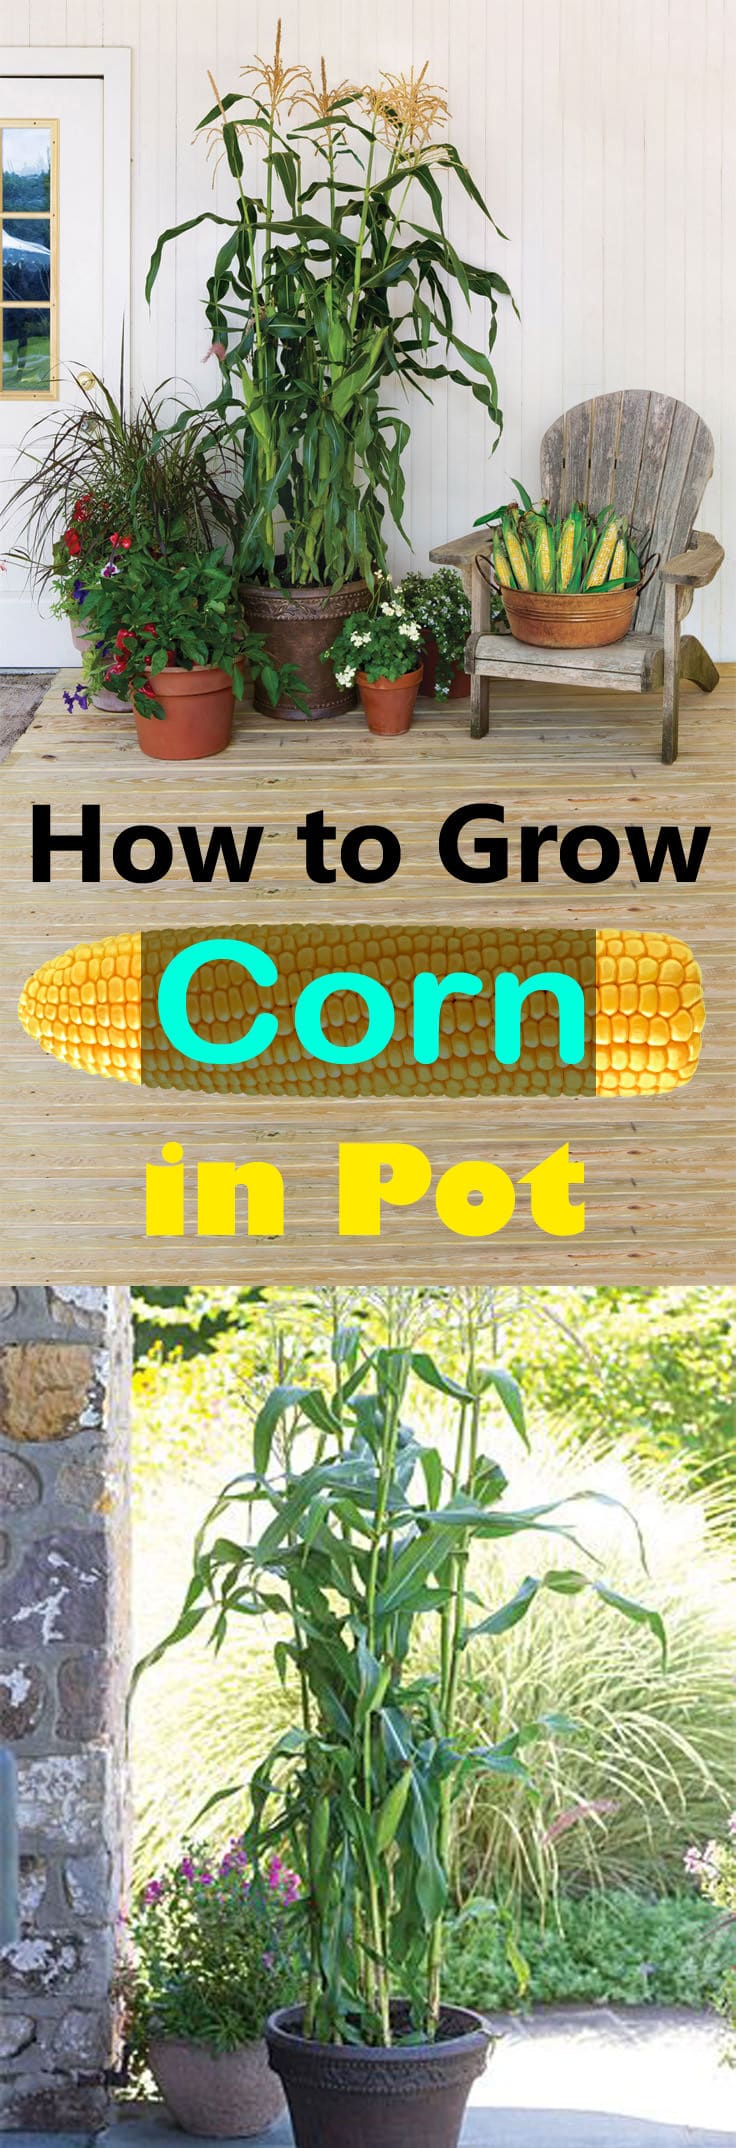 Growing corn in container is possible. All you need is a large container and you are good to harvest your fresh corns.